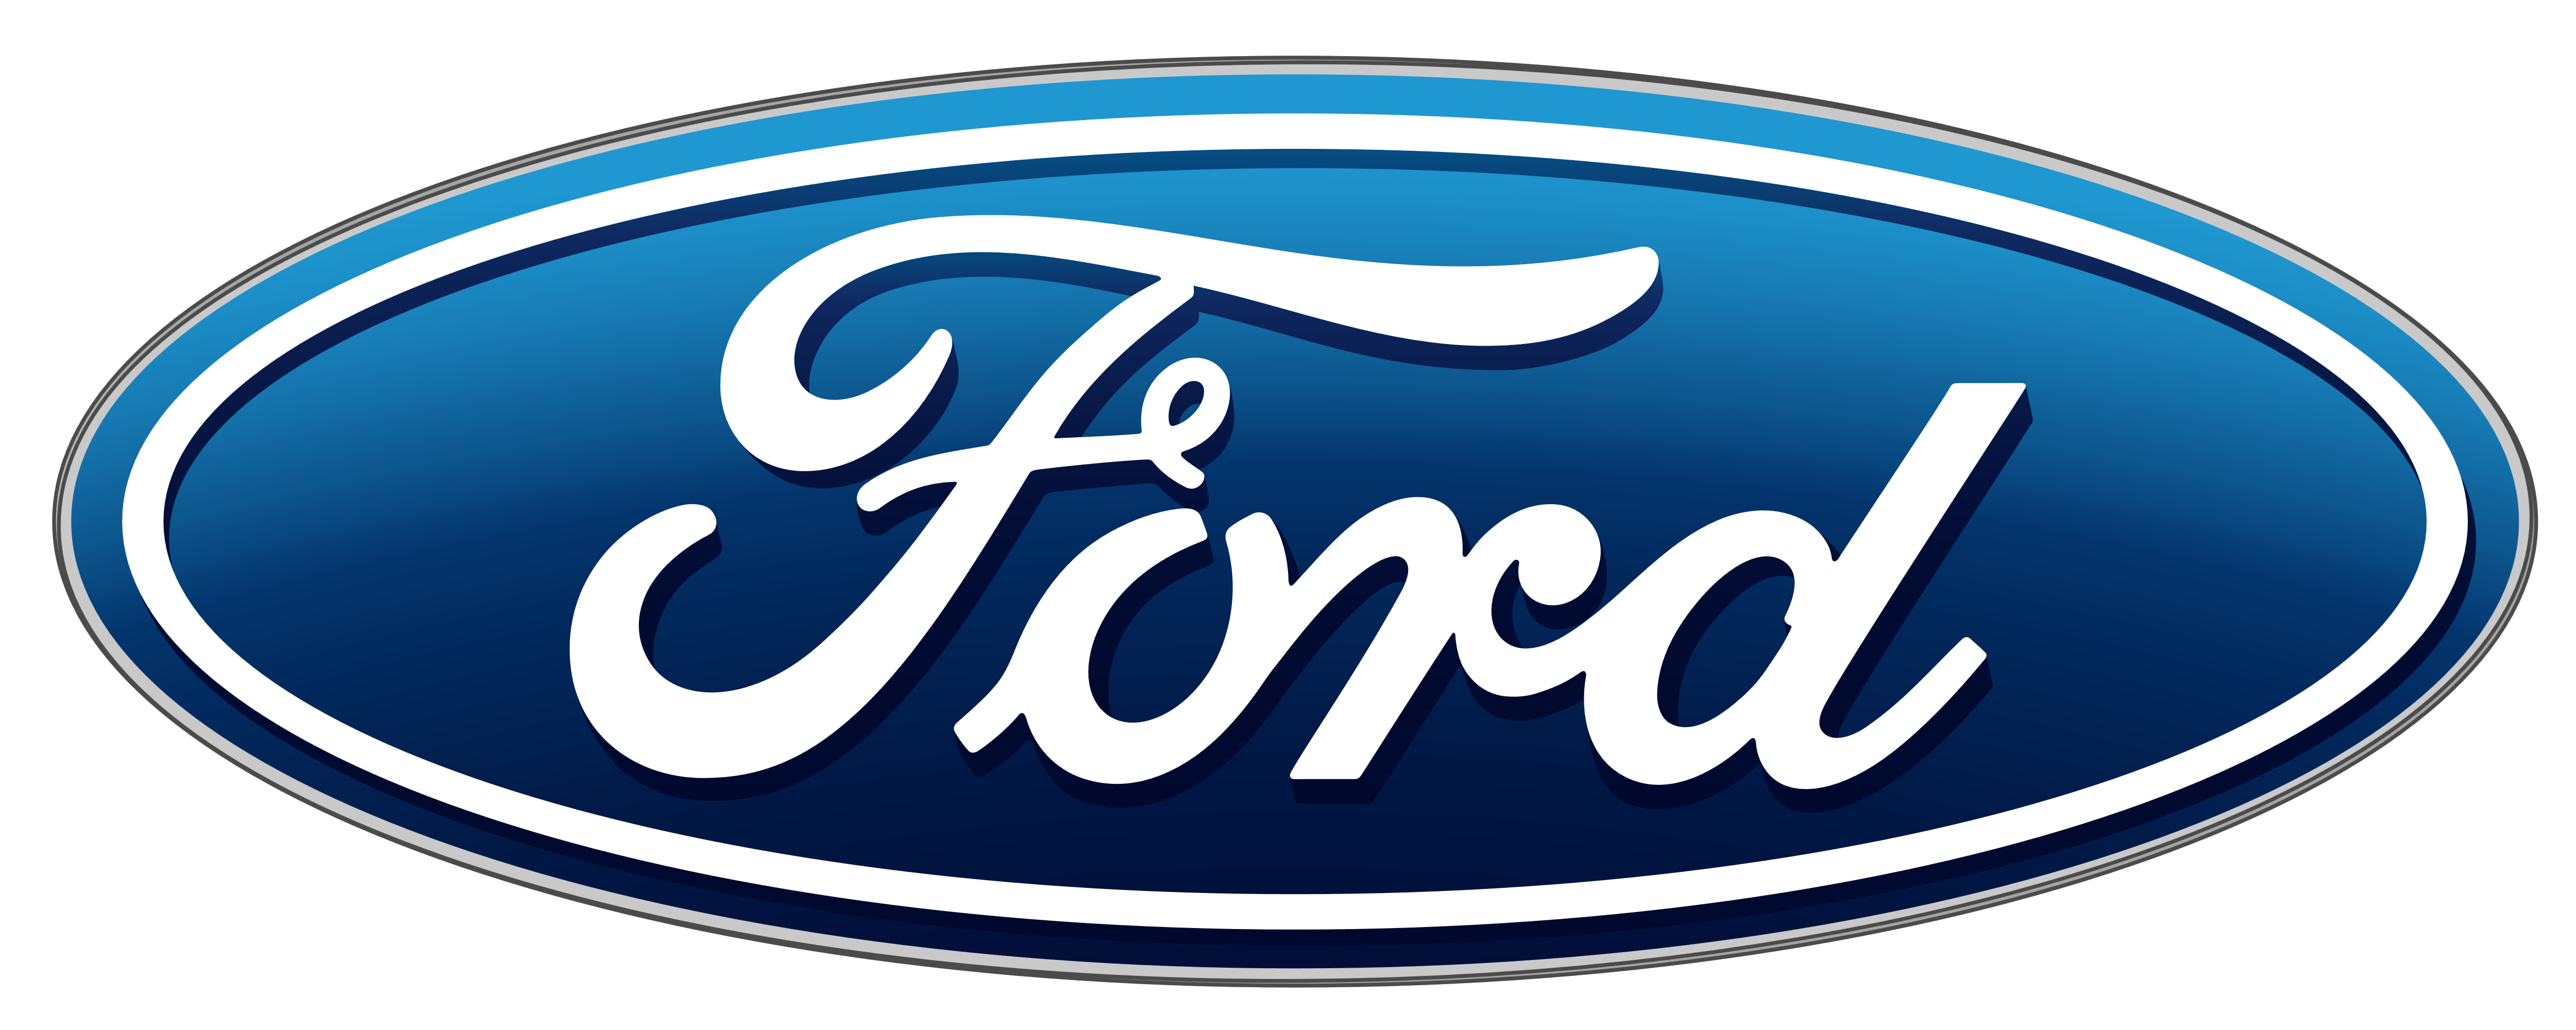 Ford Chennai Recruitment 2020 - Skill Software Engineer & Various Posts